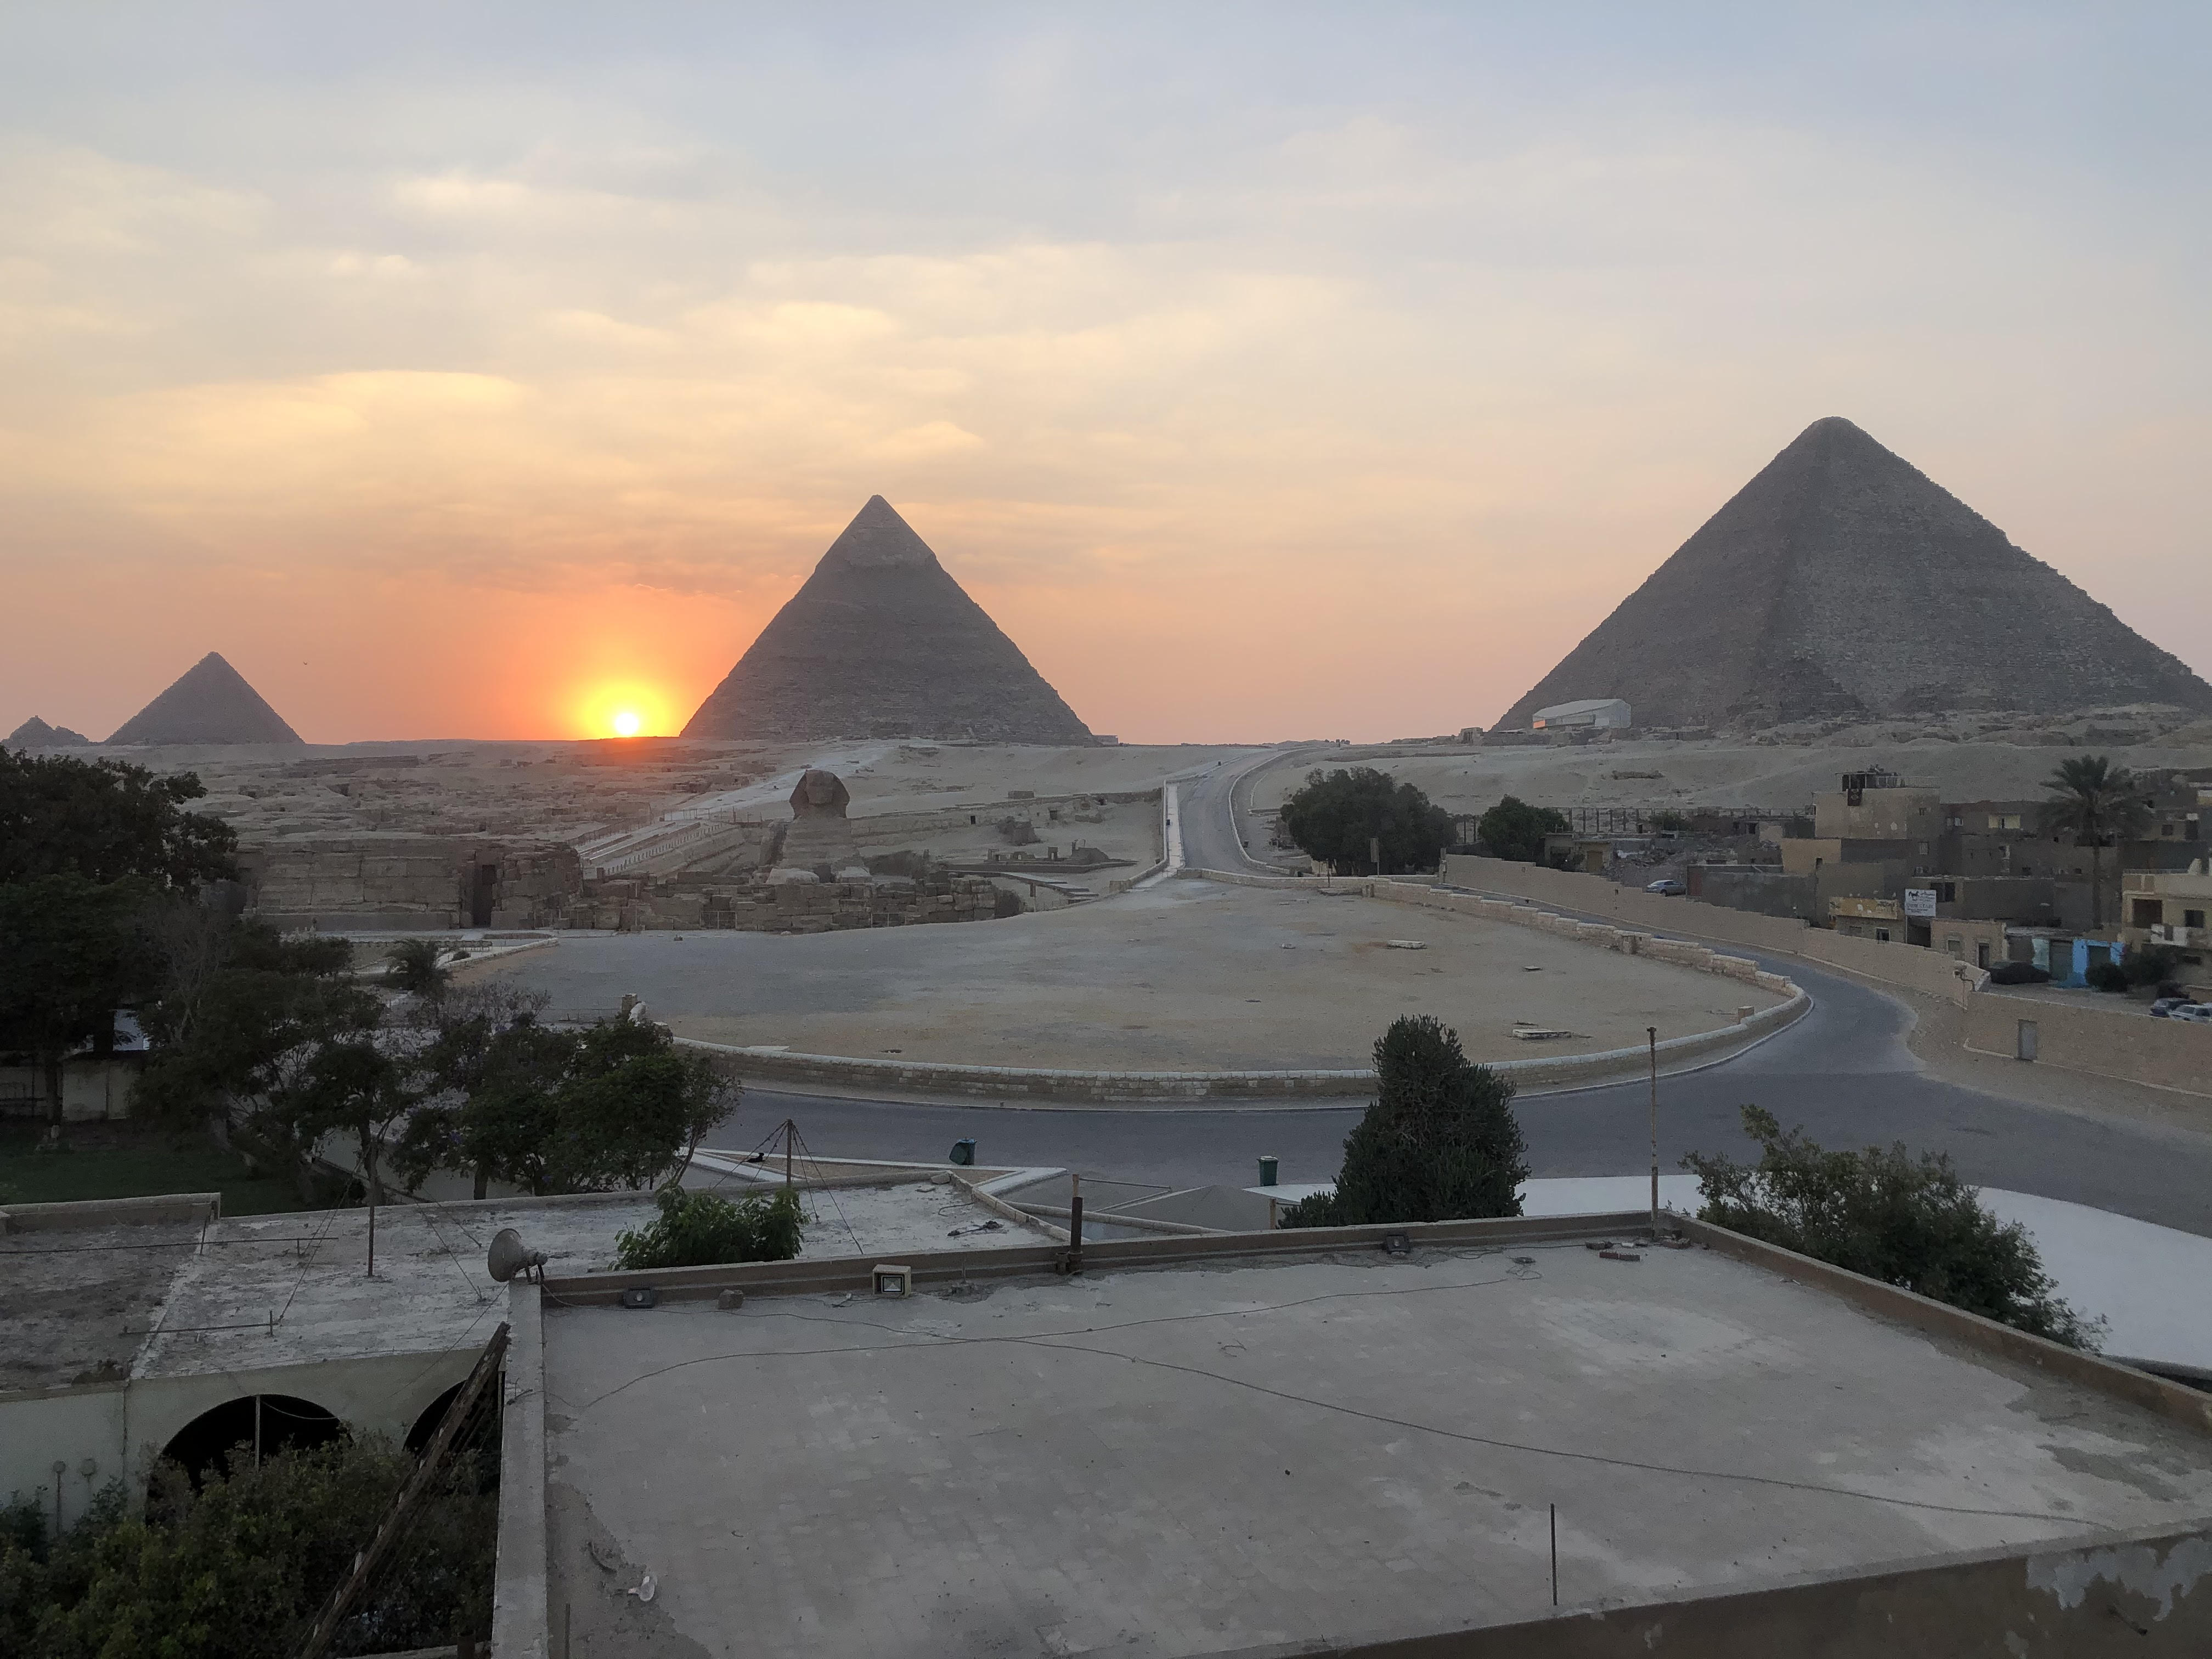 Arriving into Cairo from Malta at 3.45 am - a new dawn arrives at Giza as we finally get to our room. No time for sleep - we gaze out at the pyramids. 